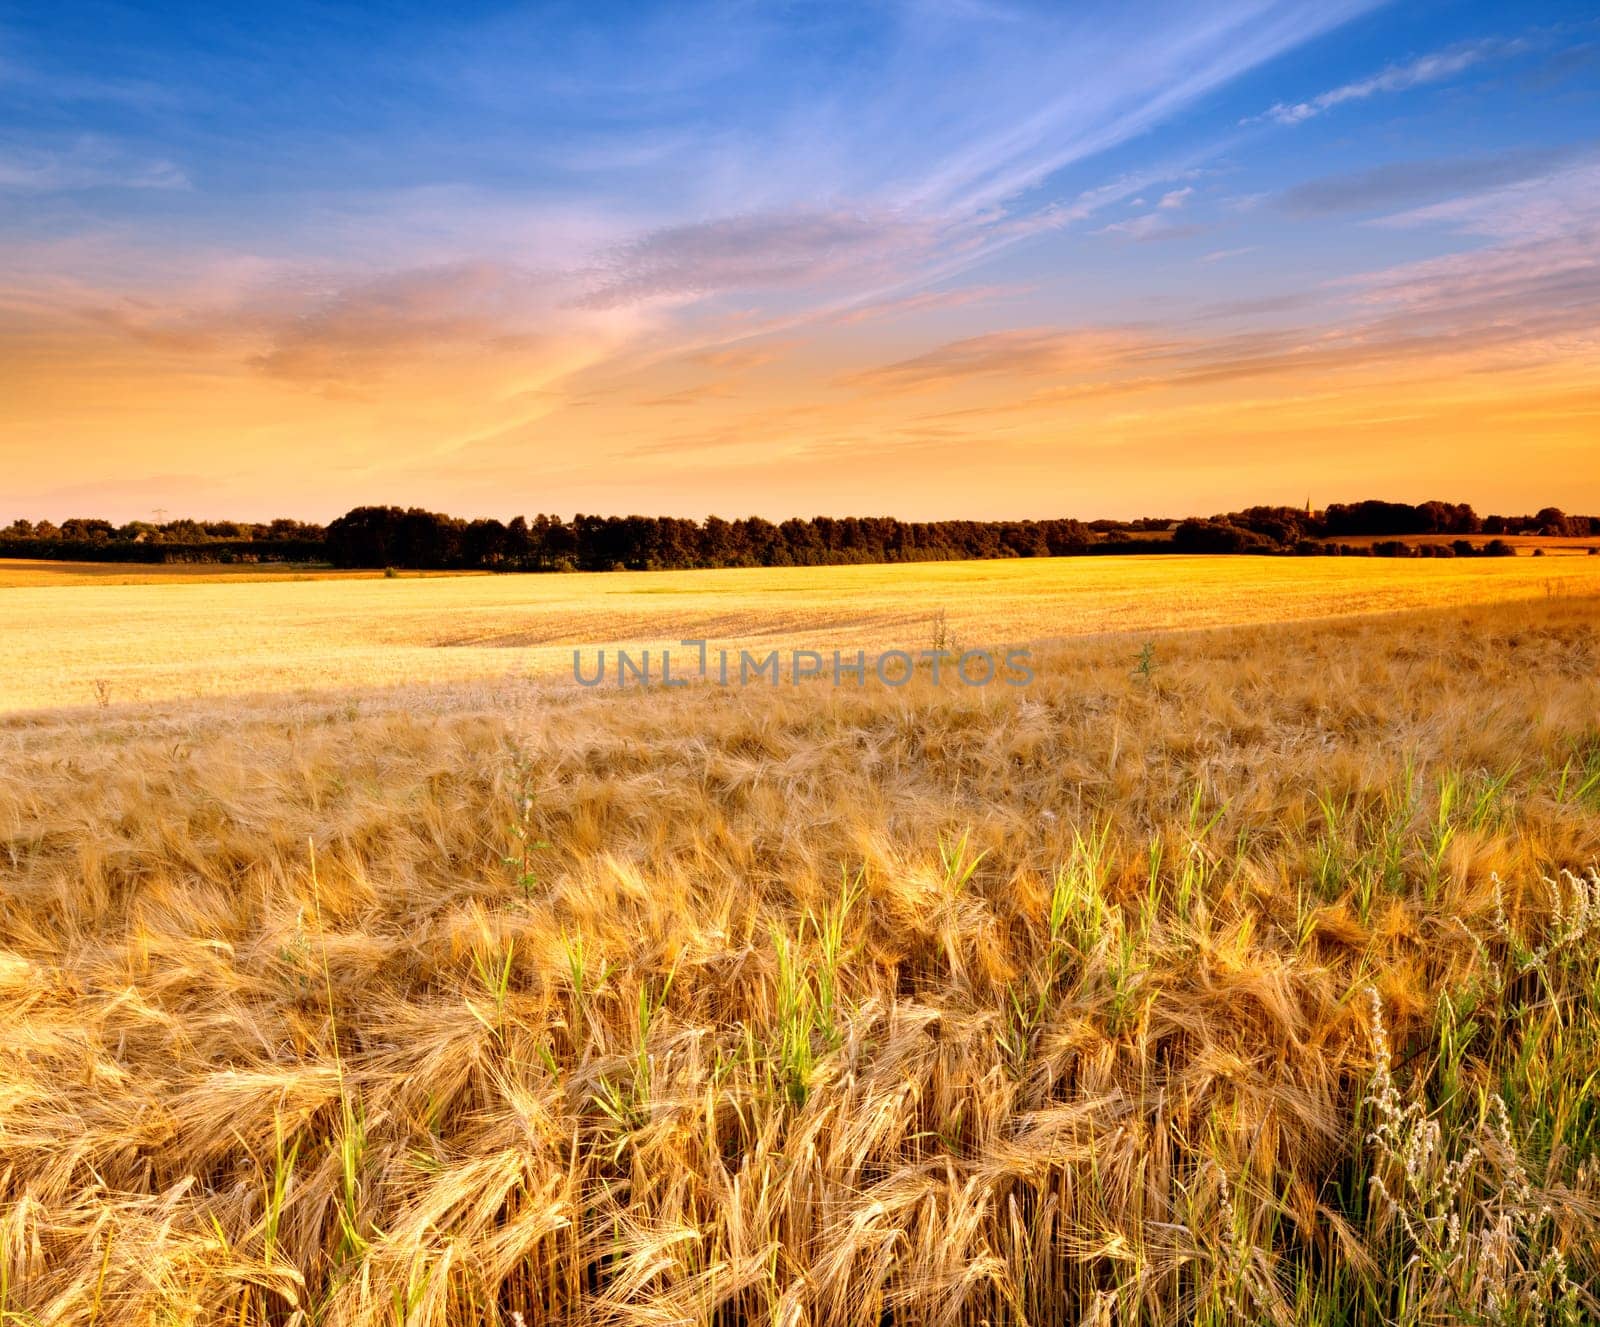 Landscape, agriculture and nature with wheat field, sky and environment for travel in countryside. Plant, grain and crops with horizon for natural background, sun and farming land for sustainability.